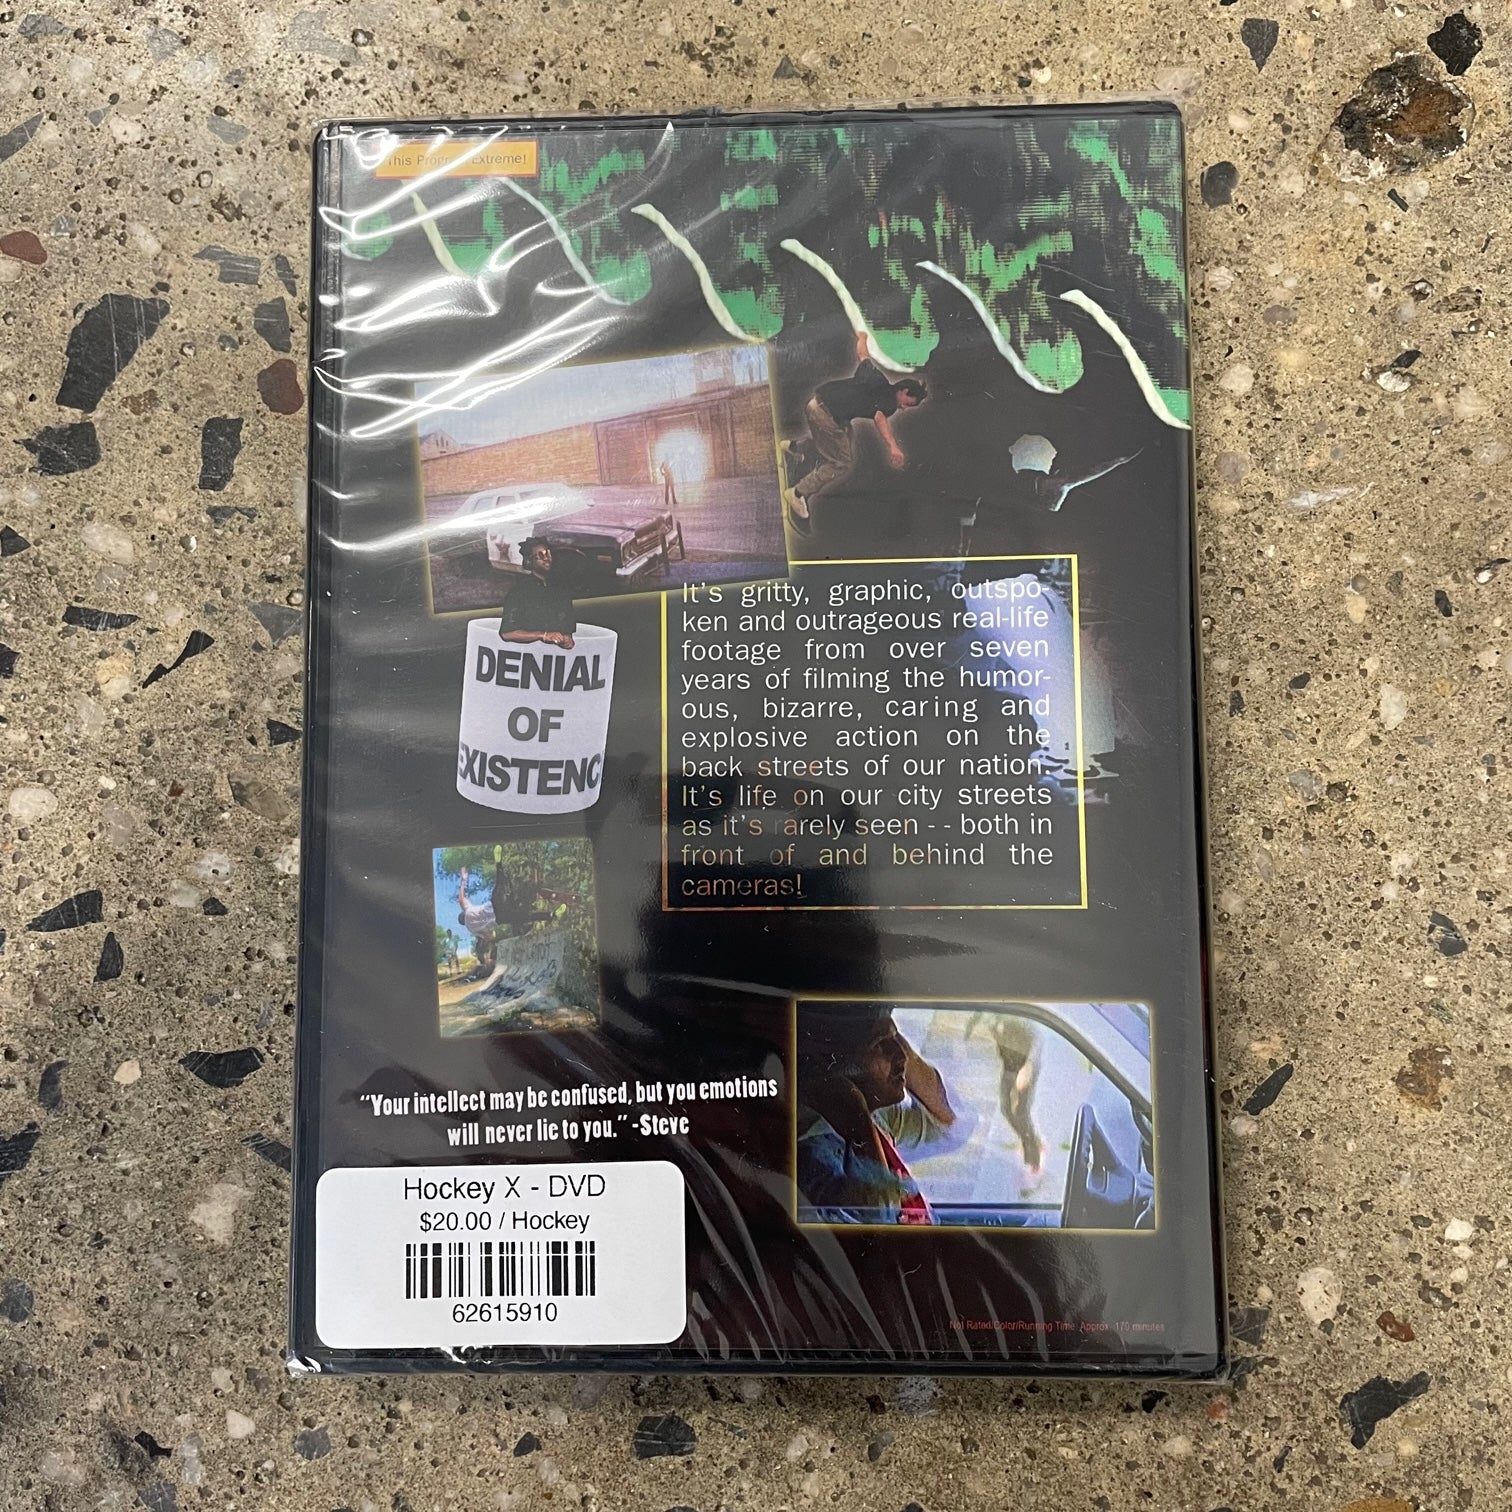 back view of DVD case with multi colored design and text